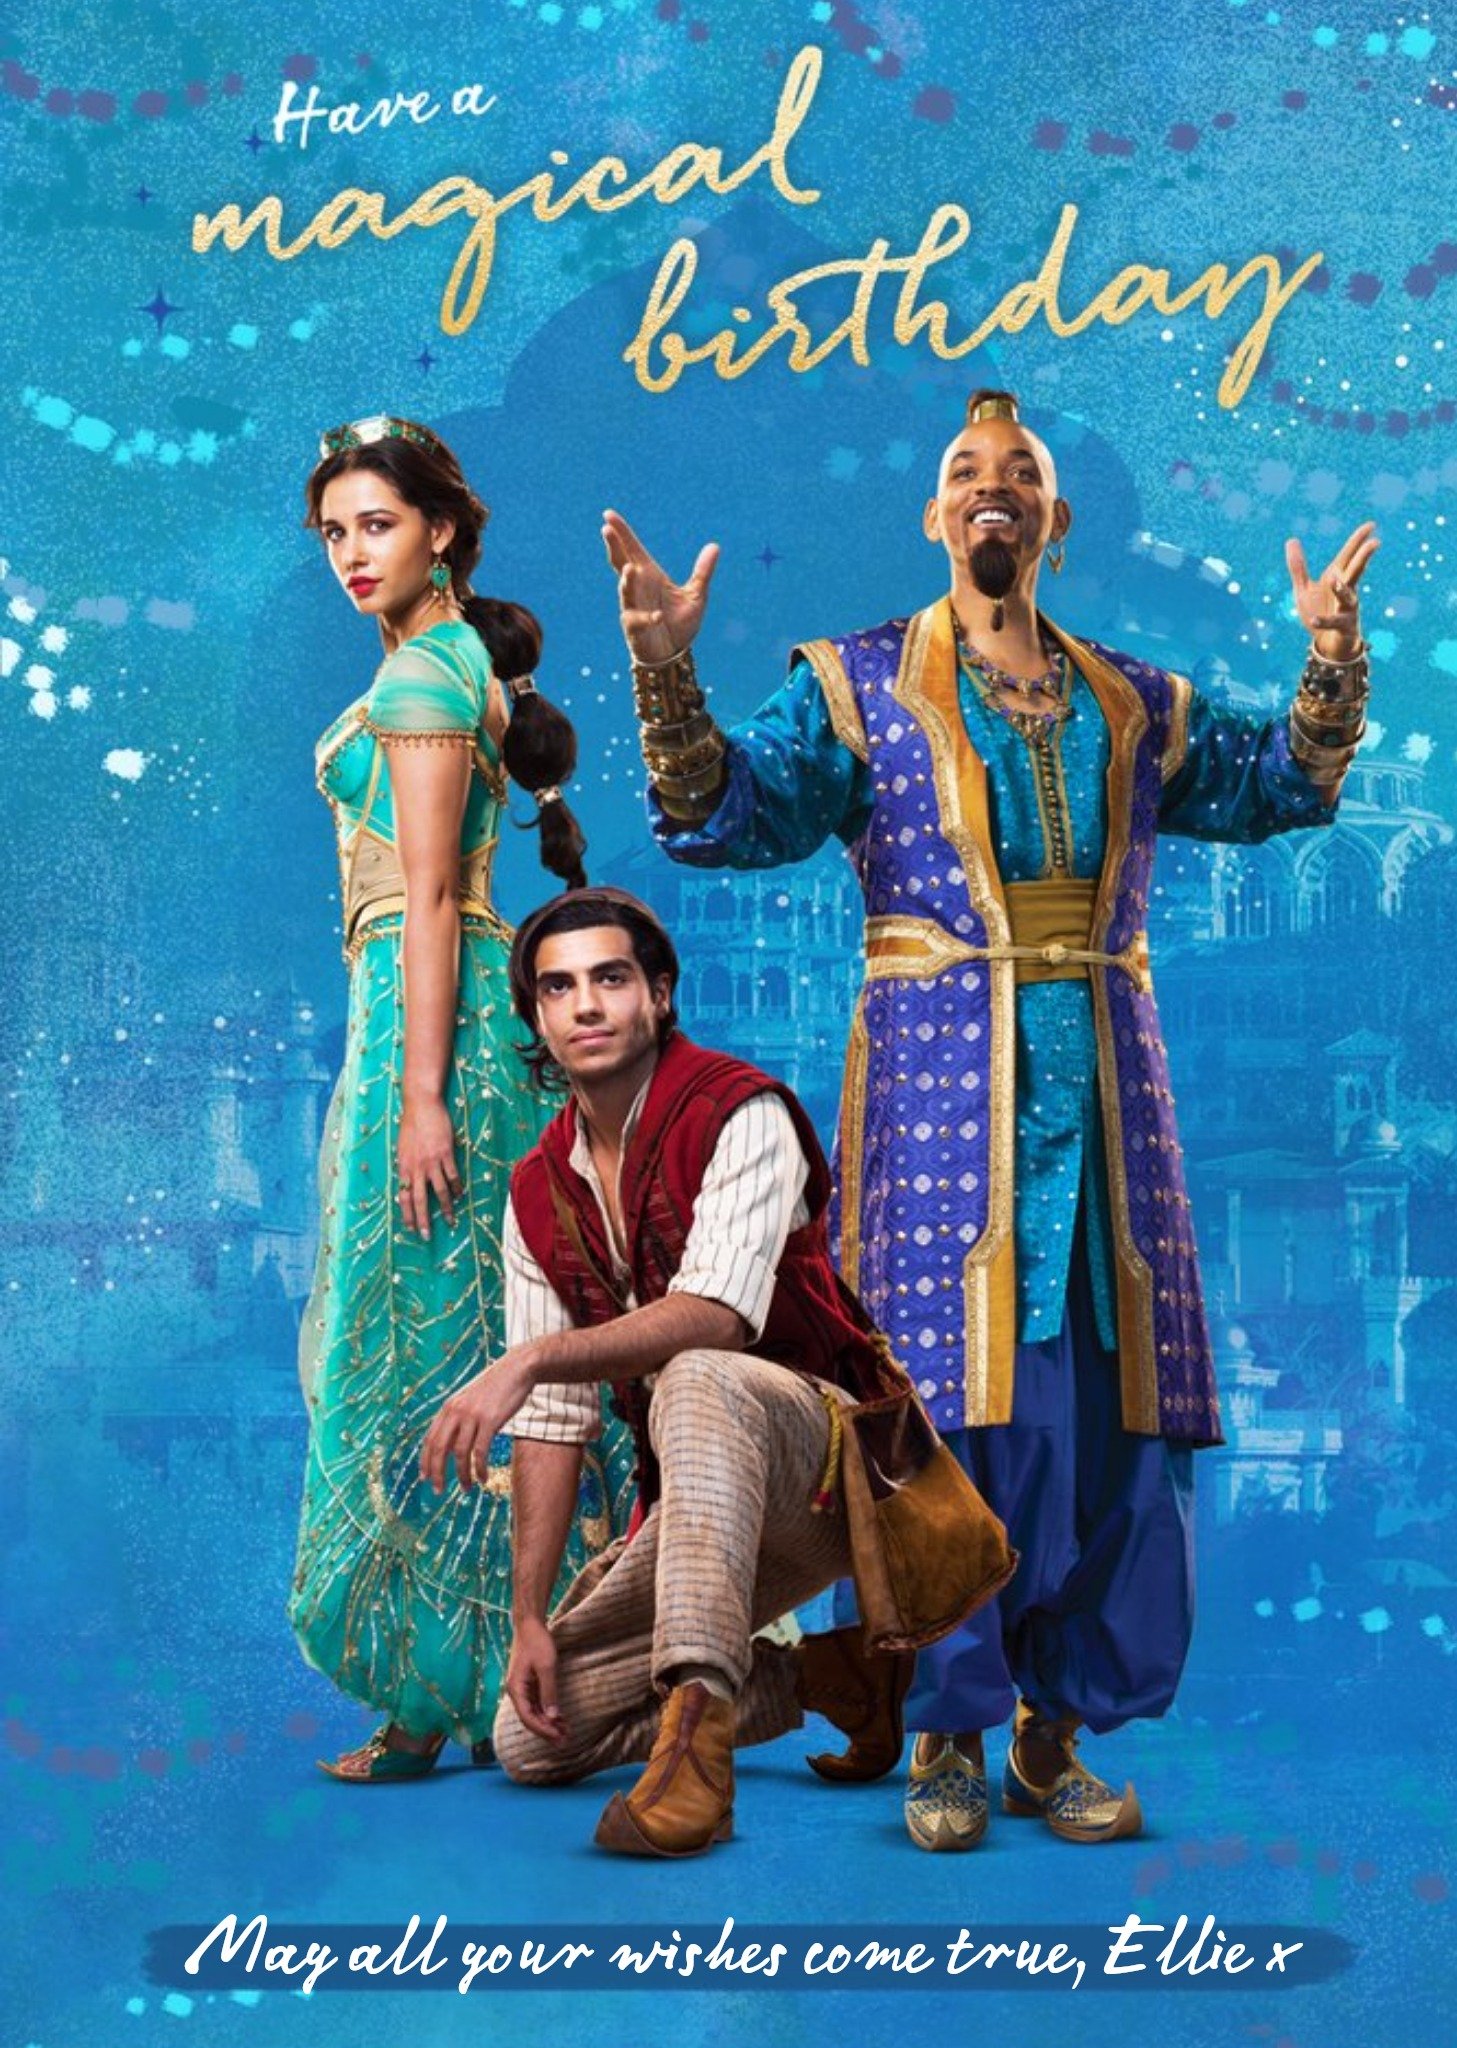 Disney Aladdin Film Birthday Card - Have A Magical Birthday, May All Your Wishes Come True X Jasmine